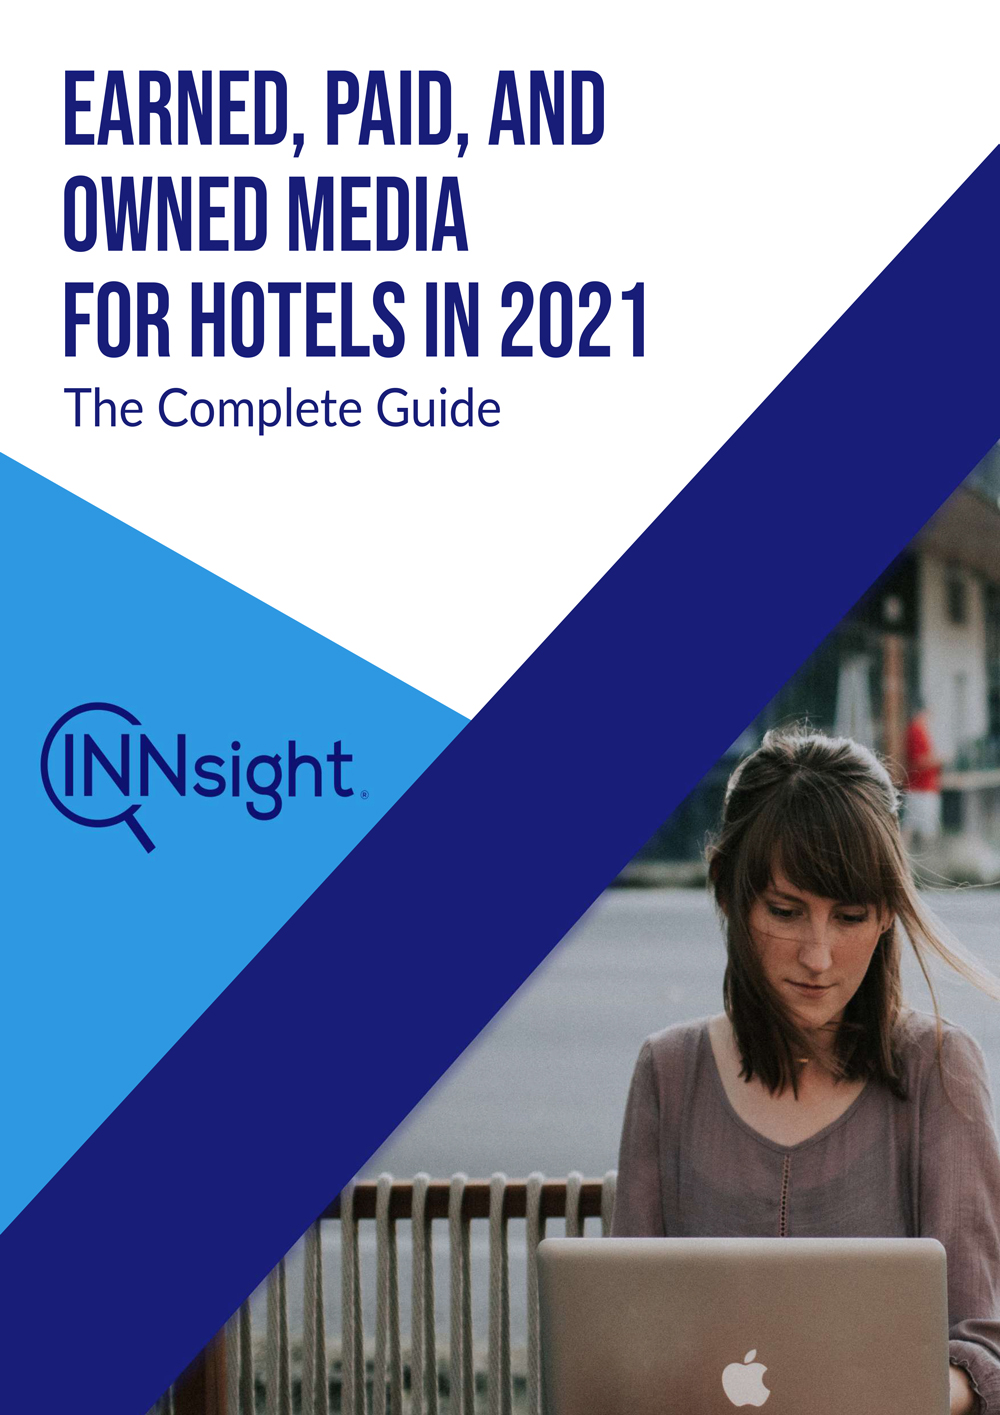 Earned, Paid, and Owned Media for Hotels in 2021